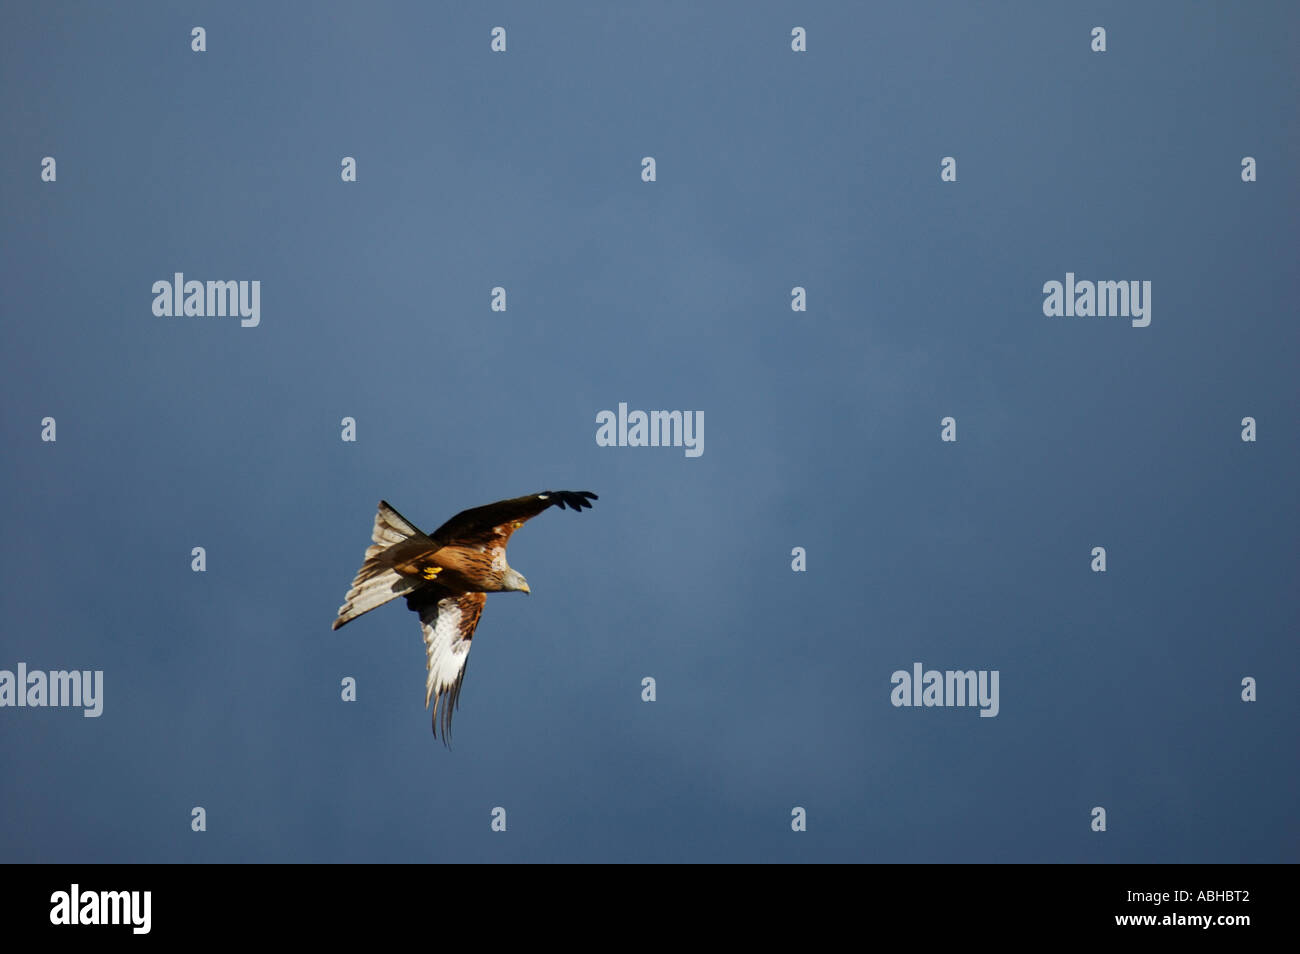 Red kite wing trappe 2359 Banque D'Images